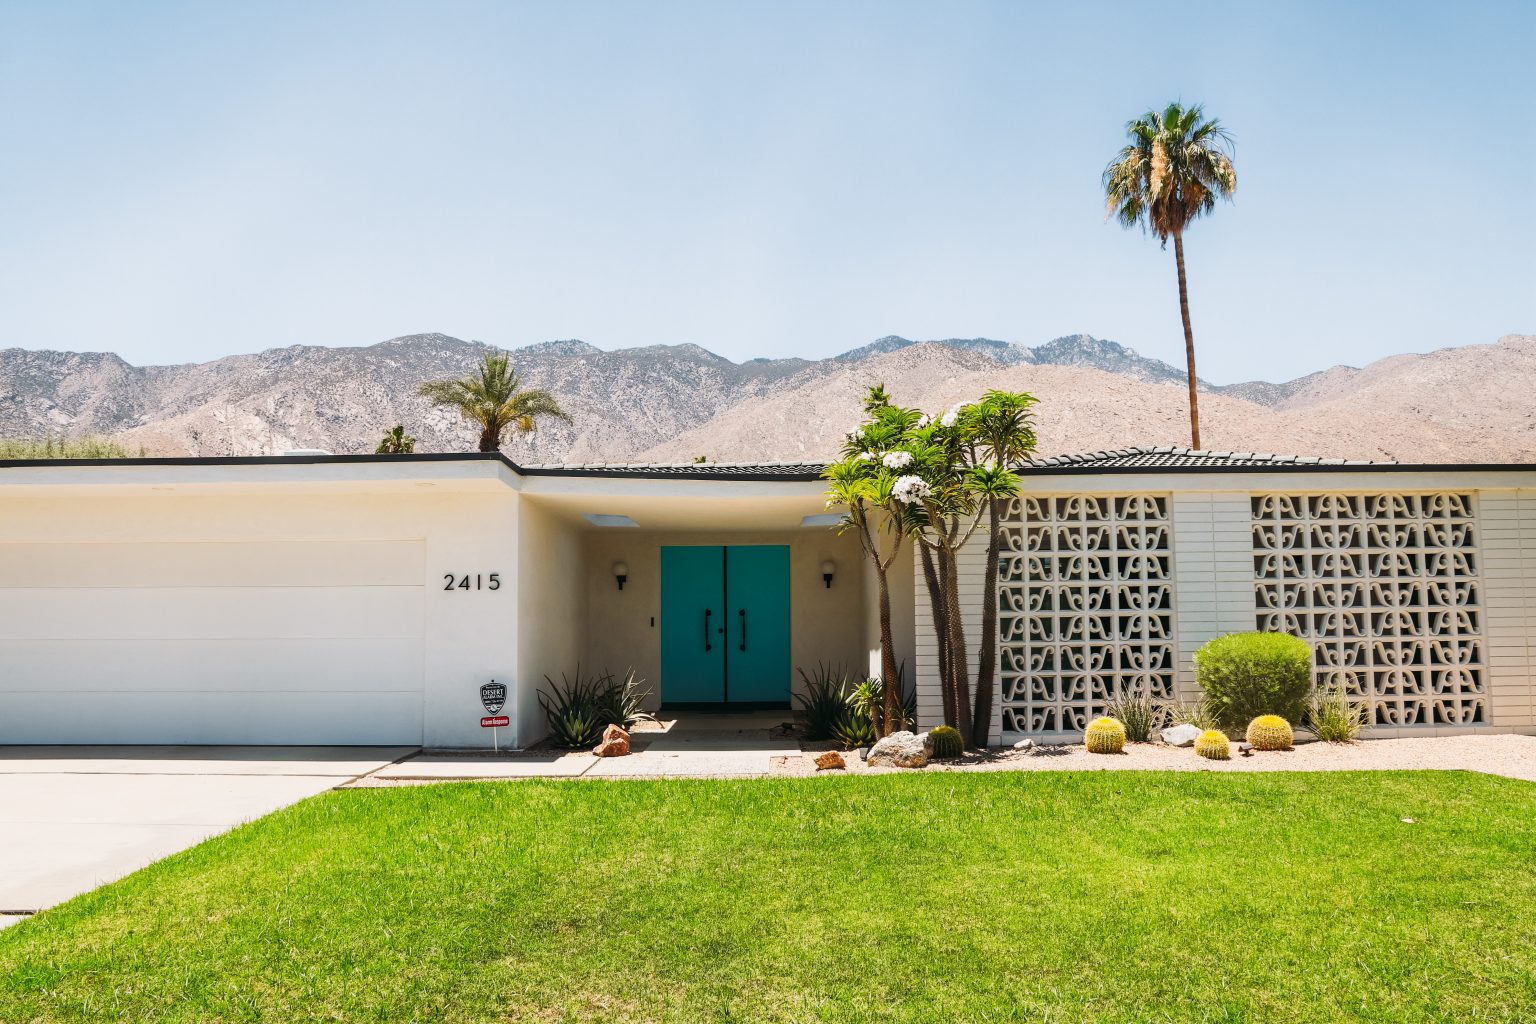 The Best Palm Springs Door Tour Guide + Video - Trips x Dip